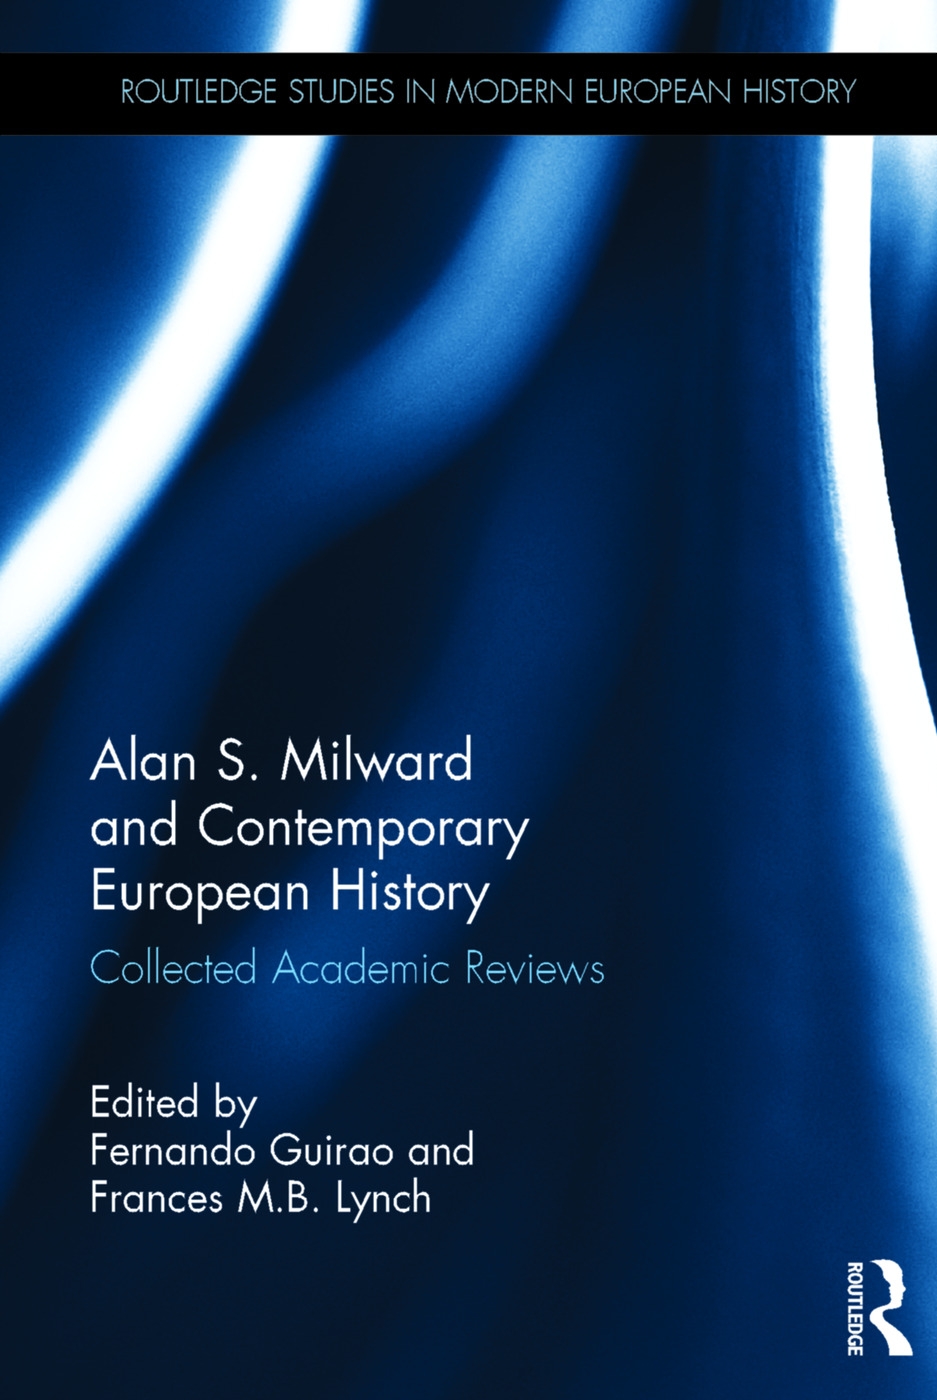 Alan S. Milward and Contemporary European History: Collected Academic Reviews